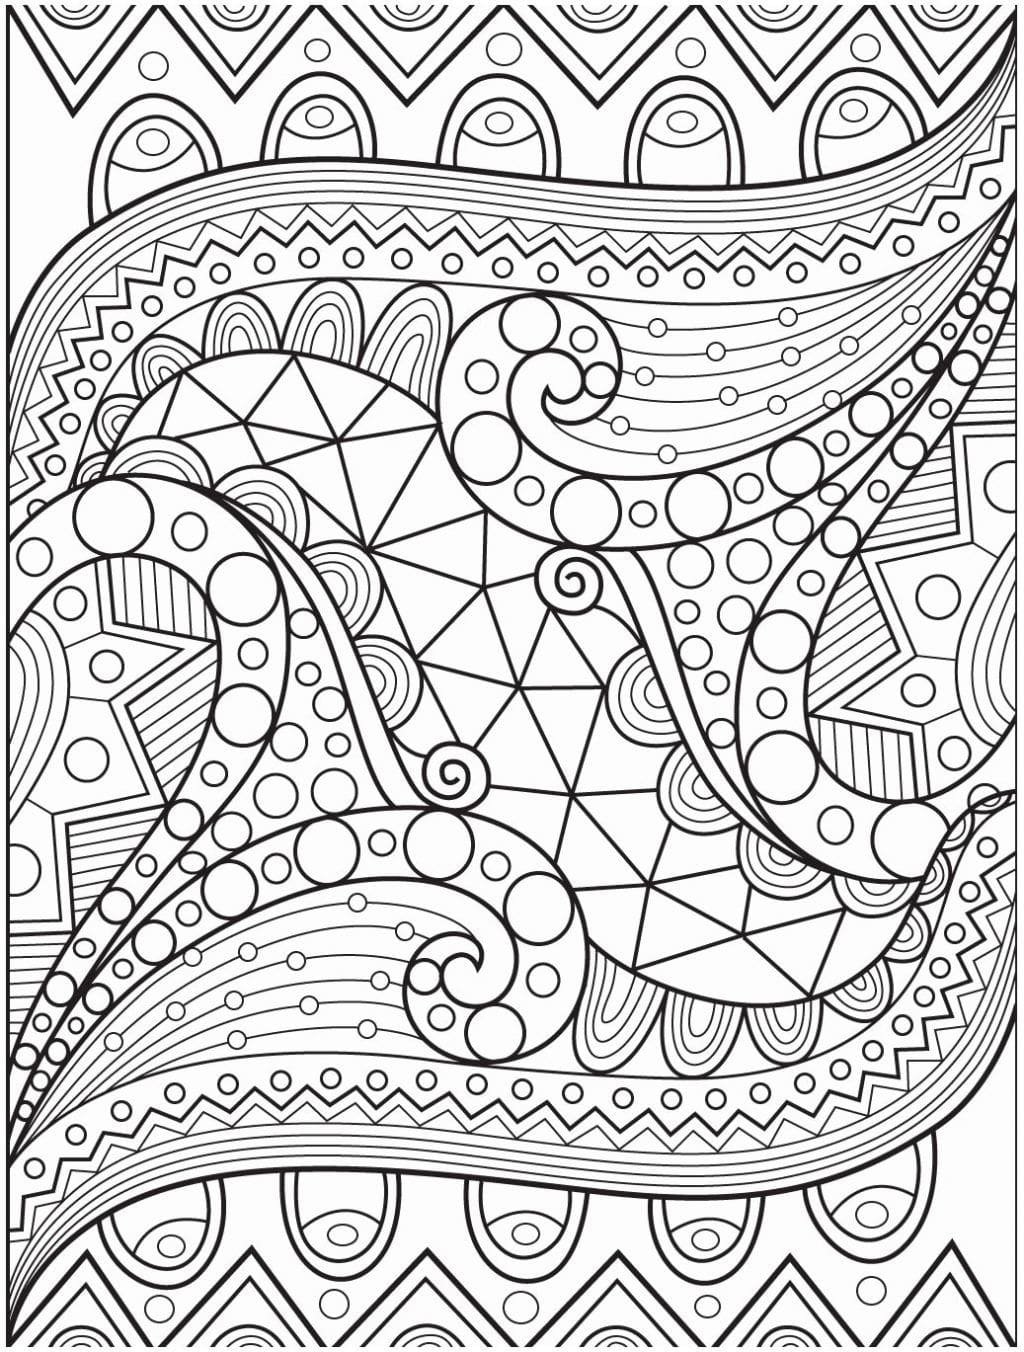 Relaxing Coloring Pages - Free Printable Coloring Sheets